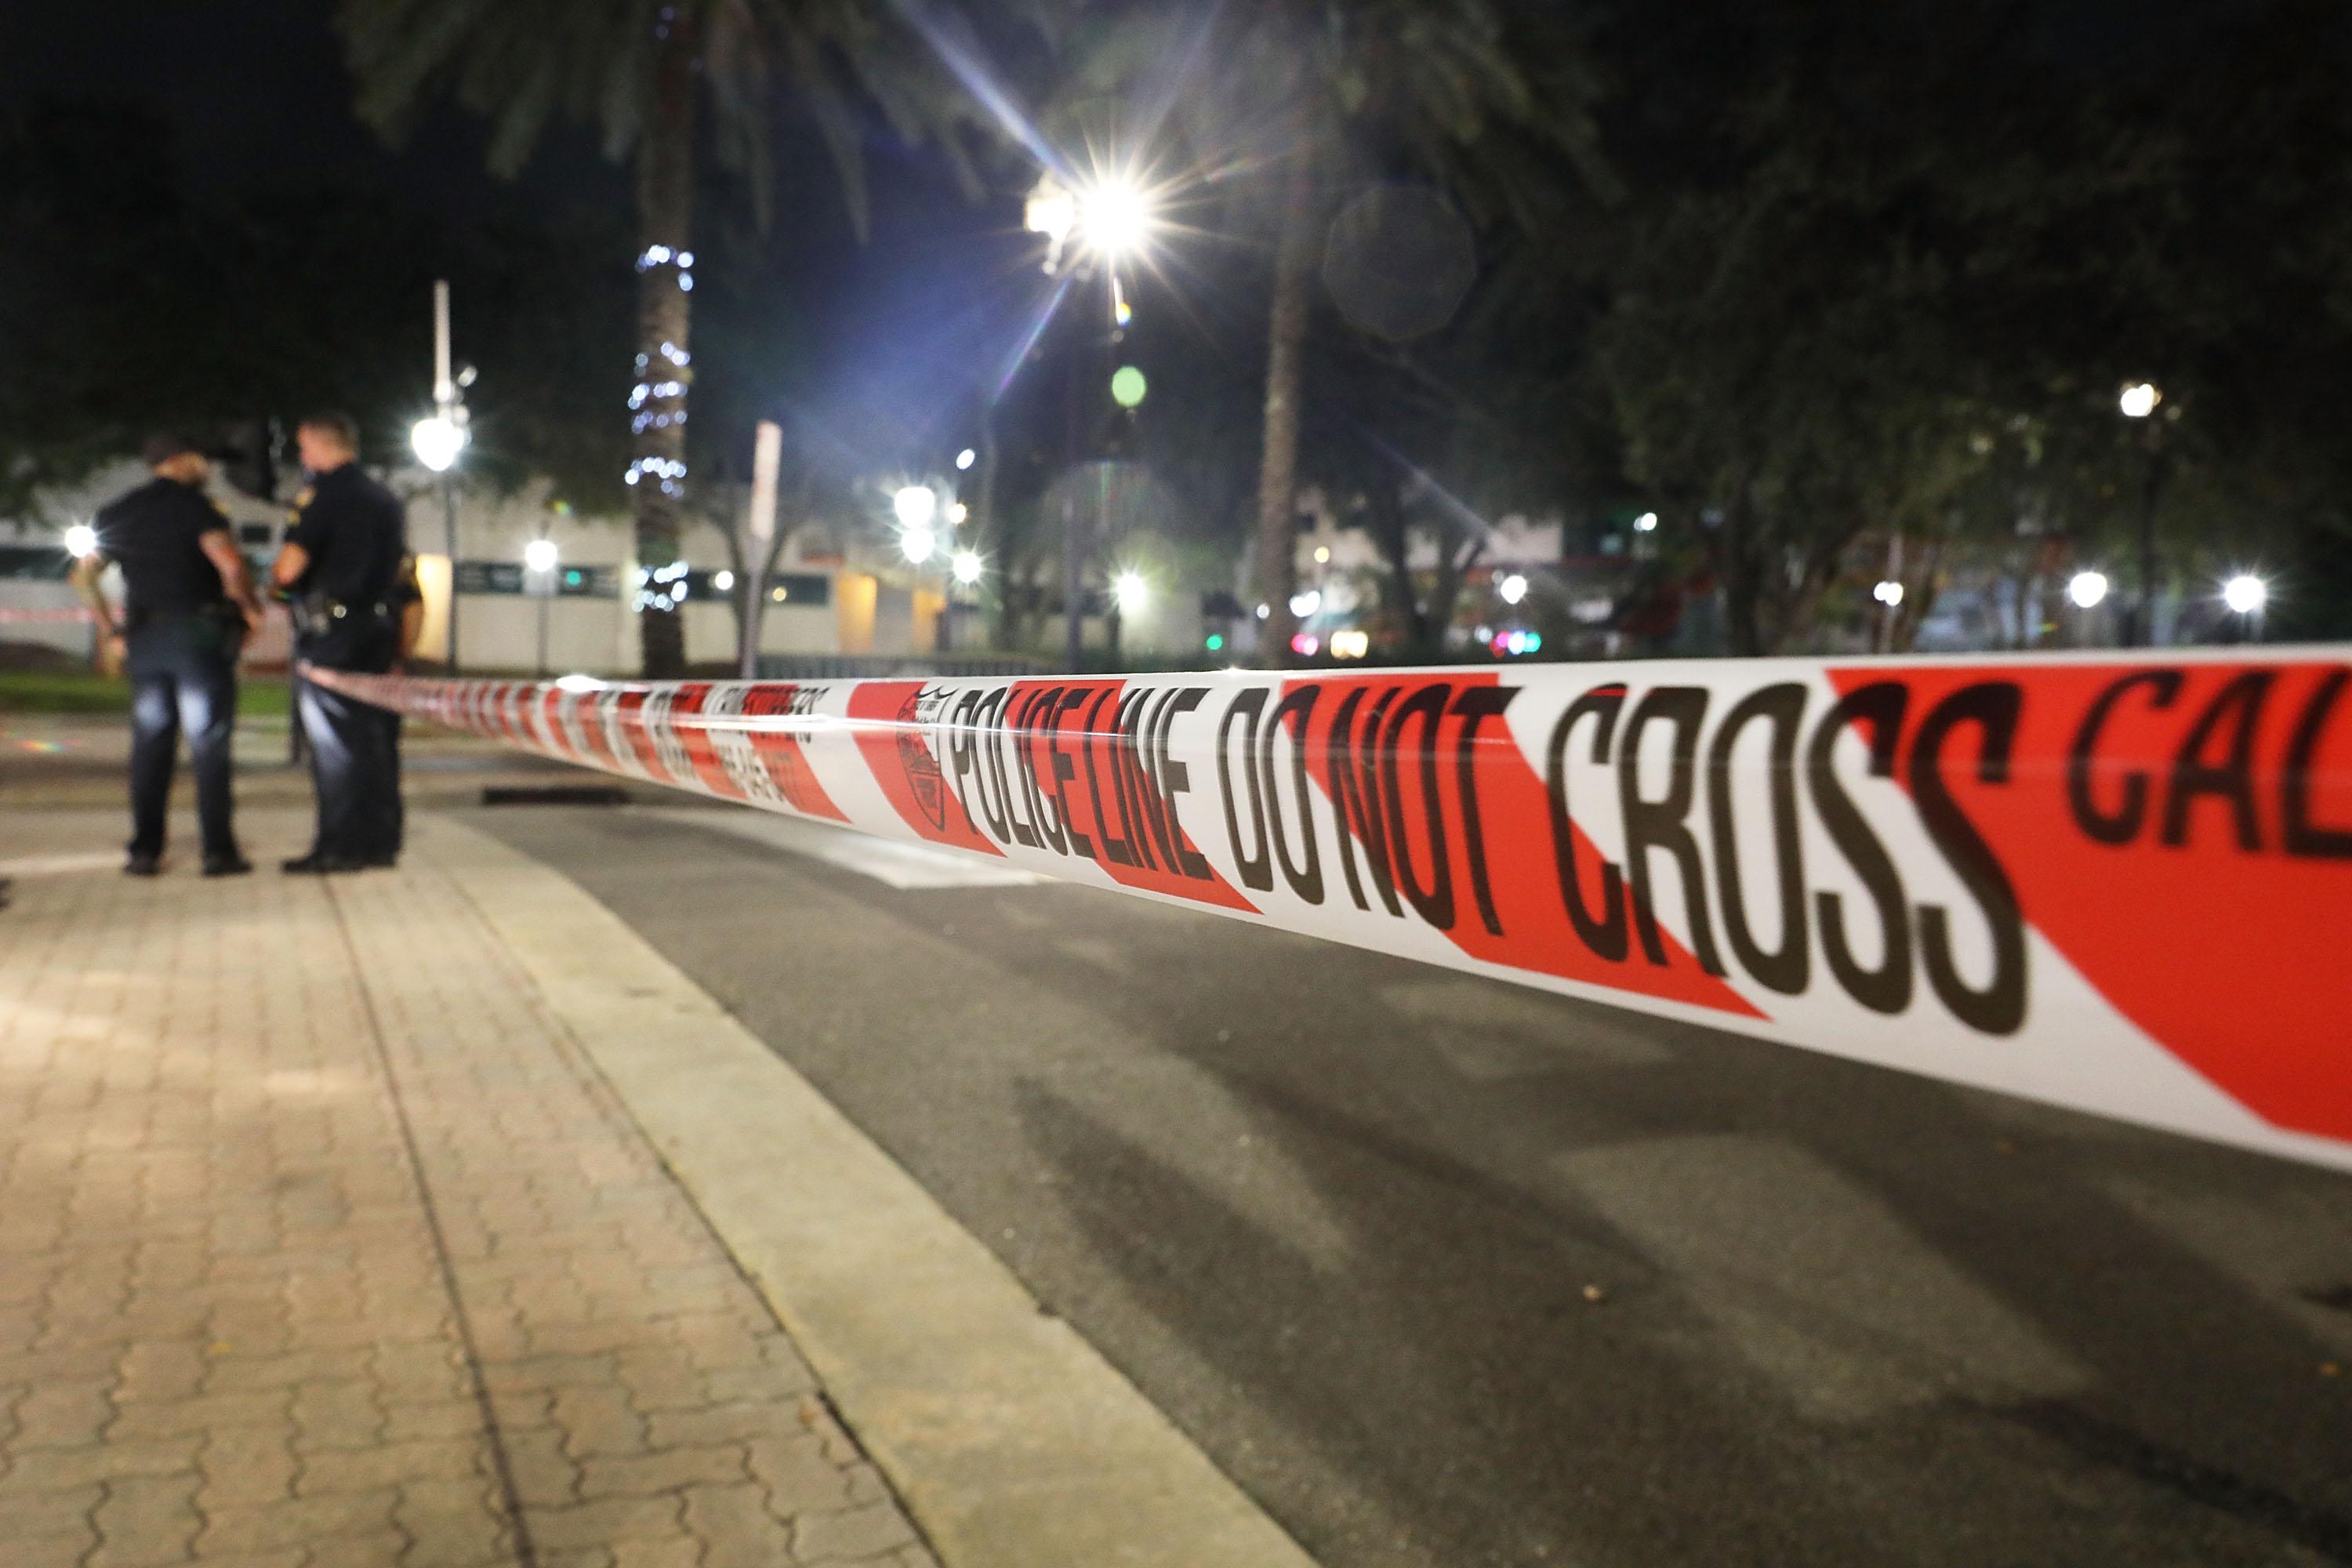 Police tape is seen as law enforcement officials investigate a shooting at the GLHF Game Bar located in the Jacksonville Landing on August 27, 2018 in Jacksonville, Florida.